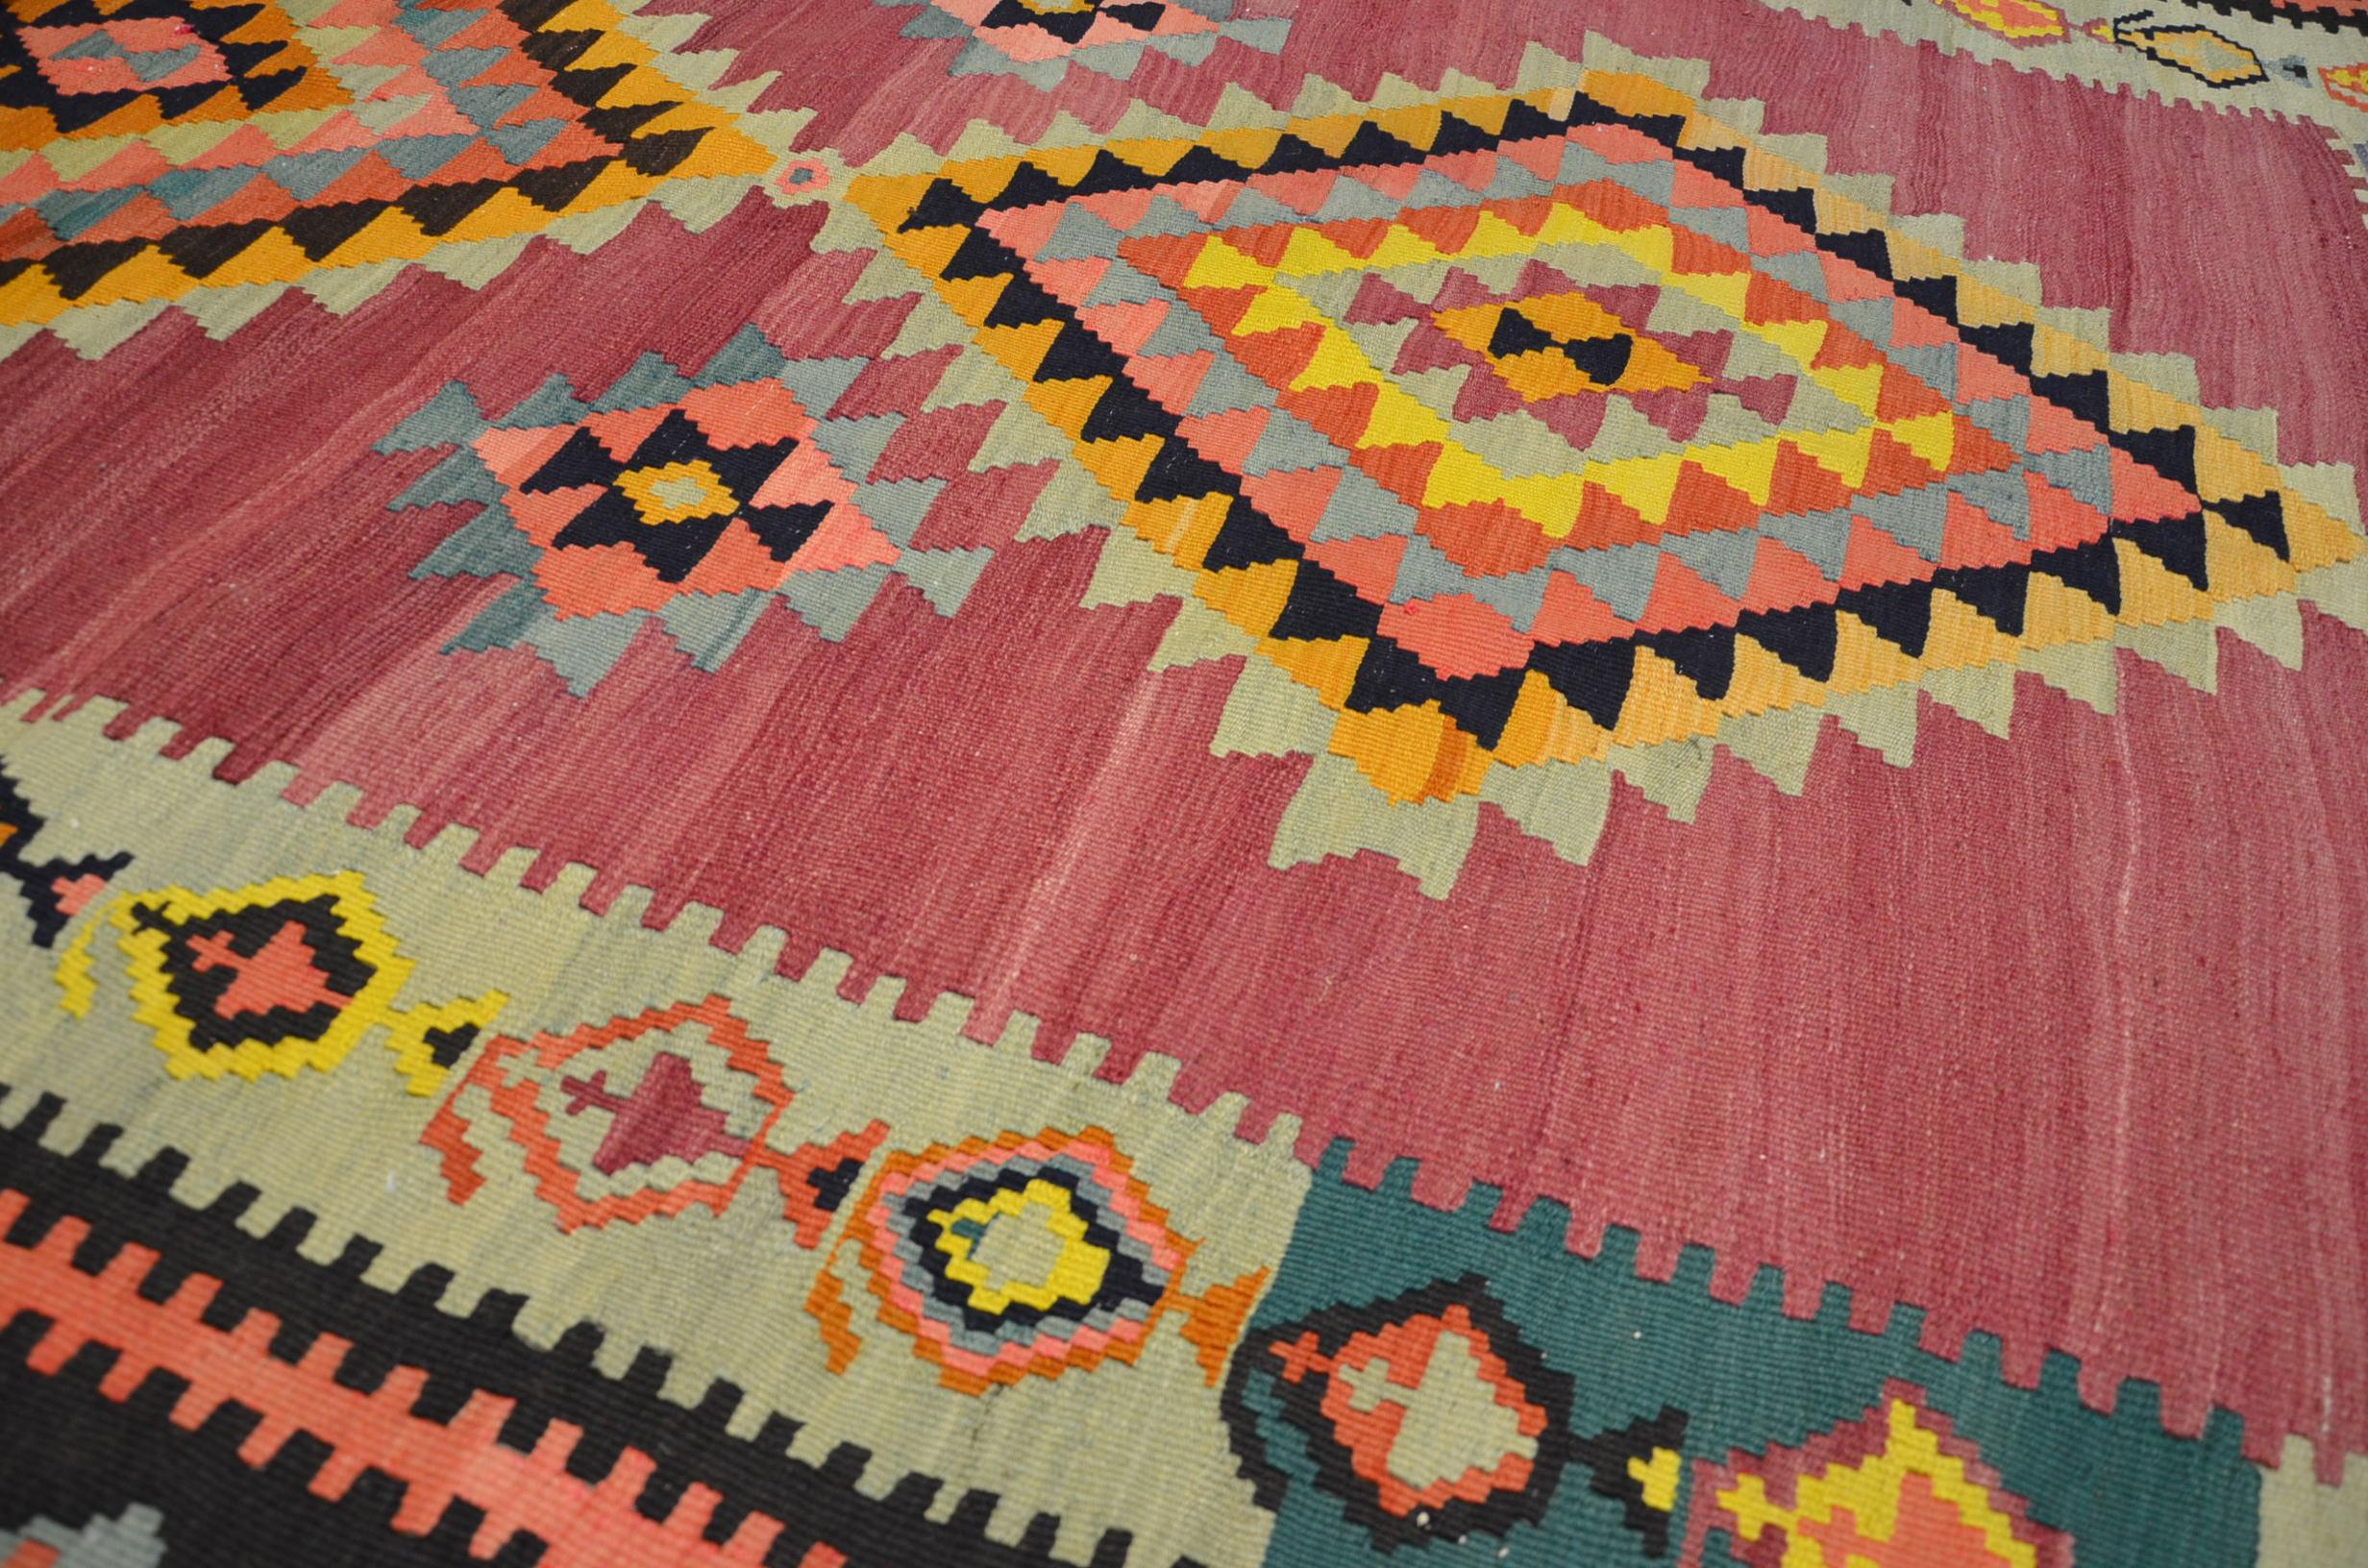 - Classic Kilim made of wool.
- His style is characterized by its multicolor geometric designs .
- Their tones are not uniform, which makes these types of rugs very functional when decorating with other fabrics.
- Its flat texture mixes different